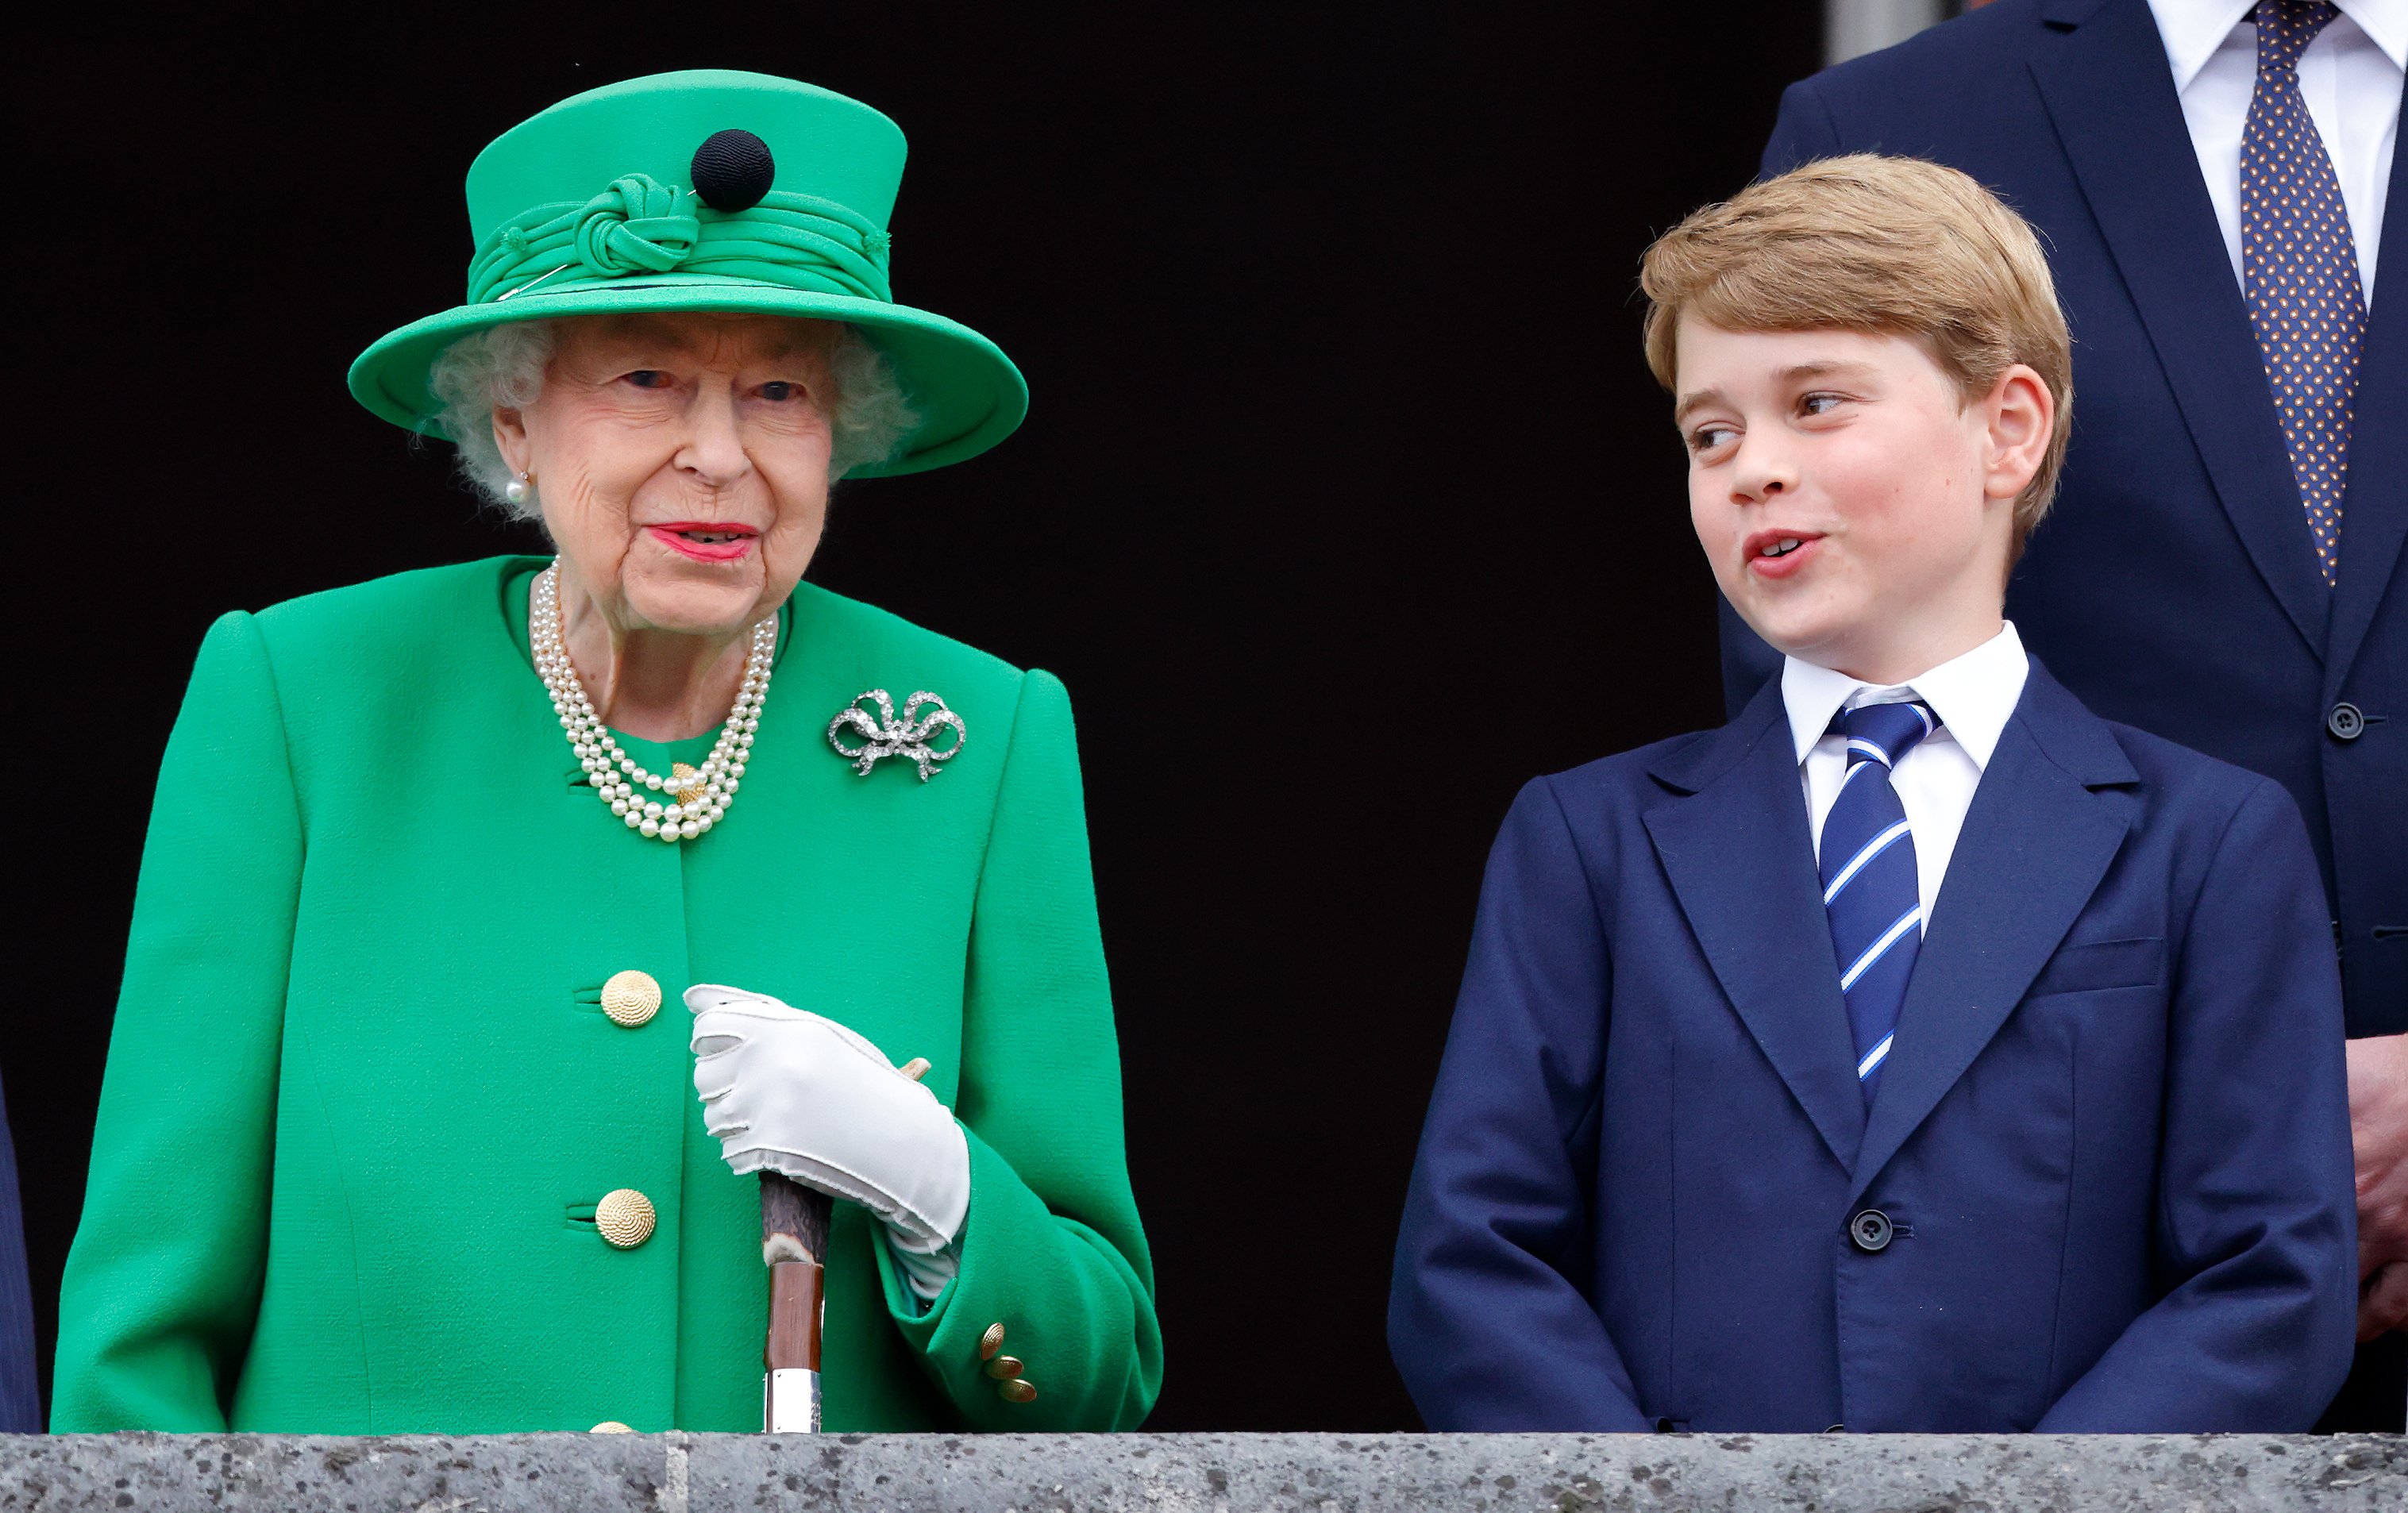 Queen Elizabeth II and Prince George stand on the balcony of Buckingham Palace following the Platinum Pageant on June 5, 2022 in London, England. | Source: Getty Images